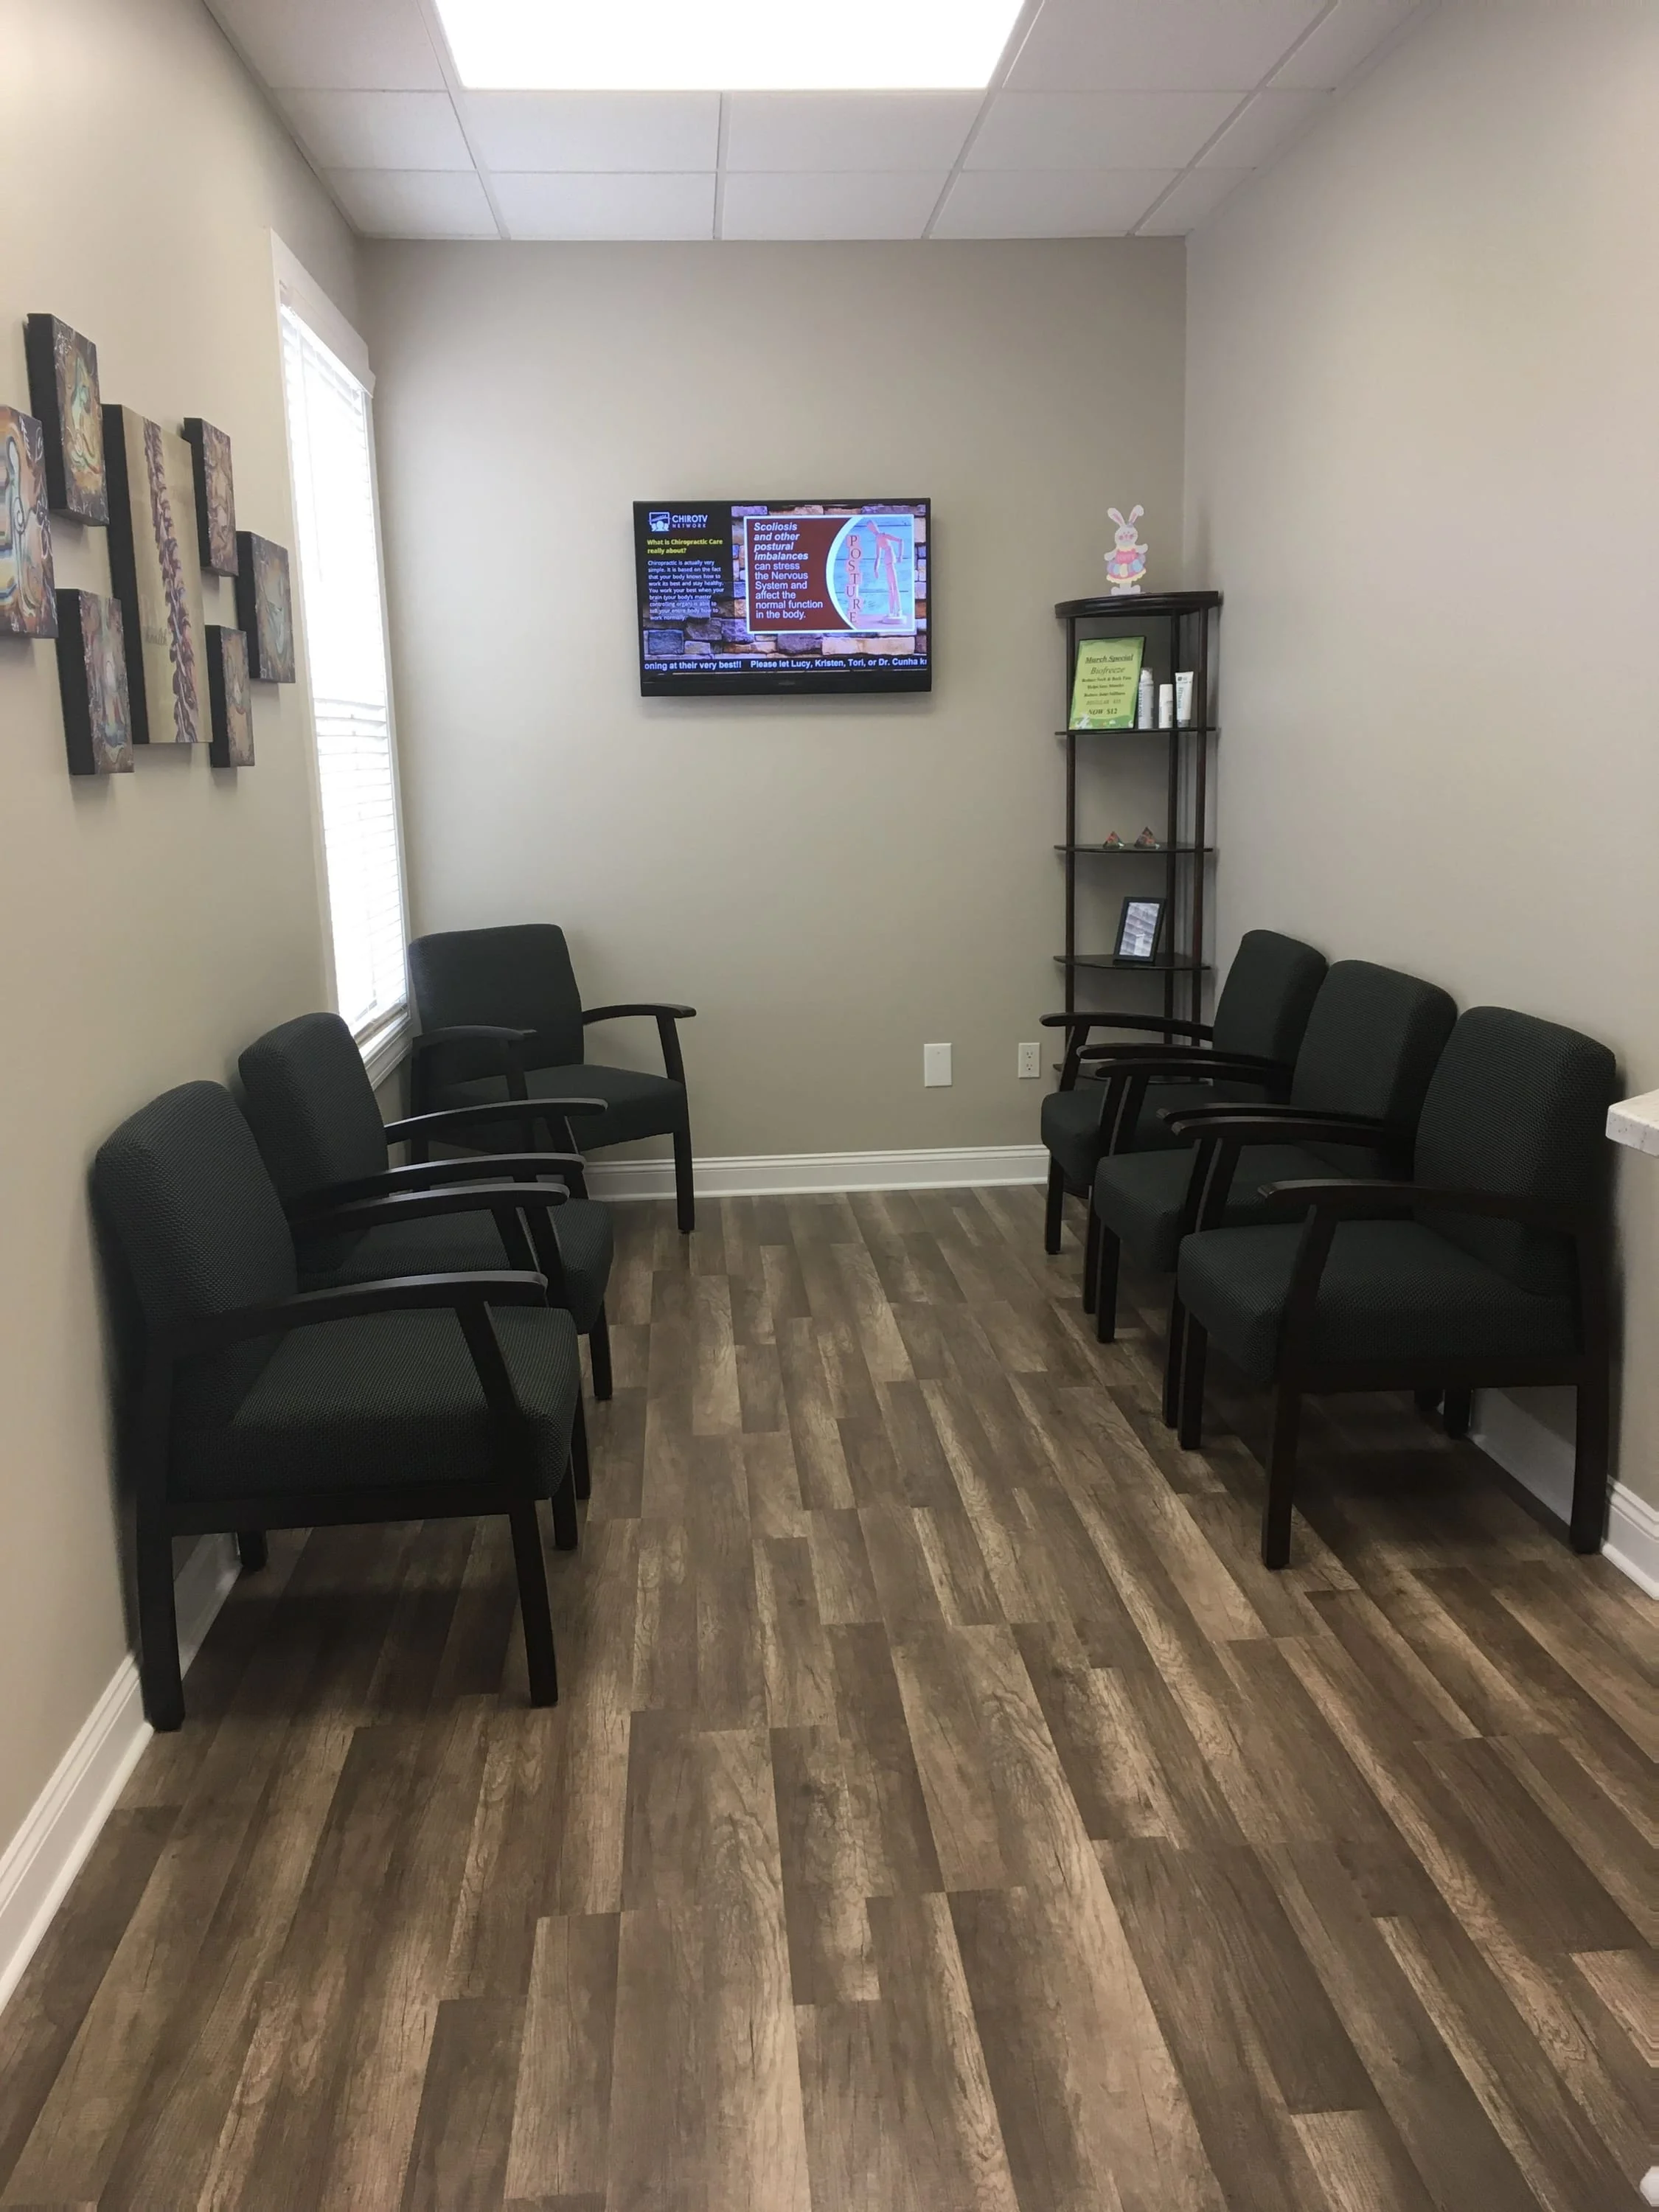 Cunha Family Chiropractic, LLC - Chiropractor In Swansea, MA USA :: Virtual  Office Tour